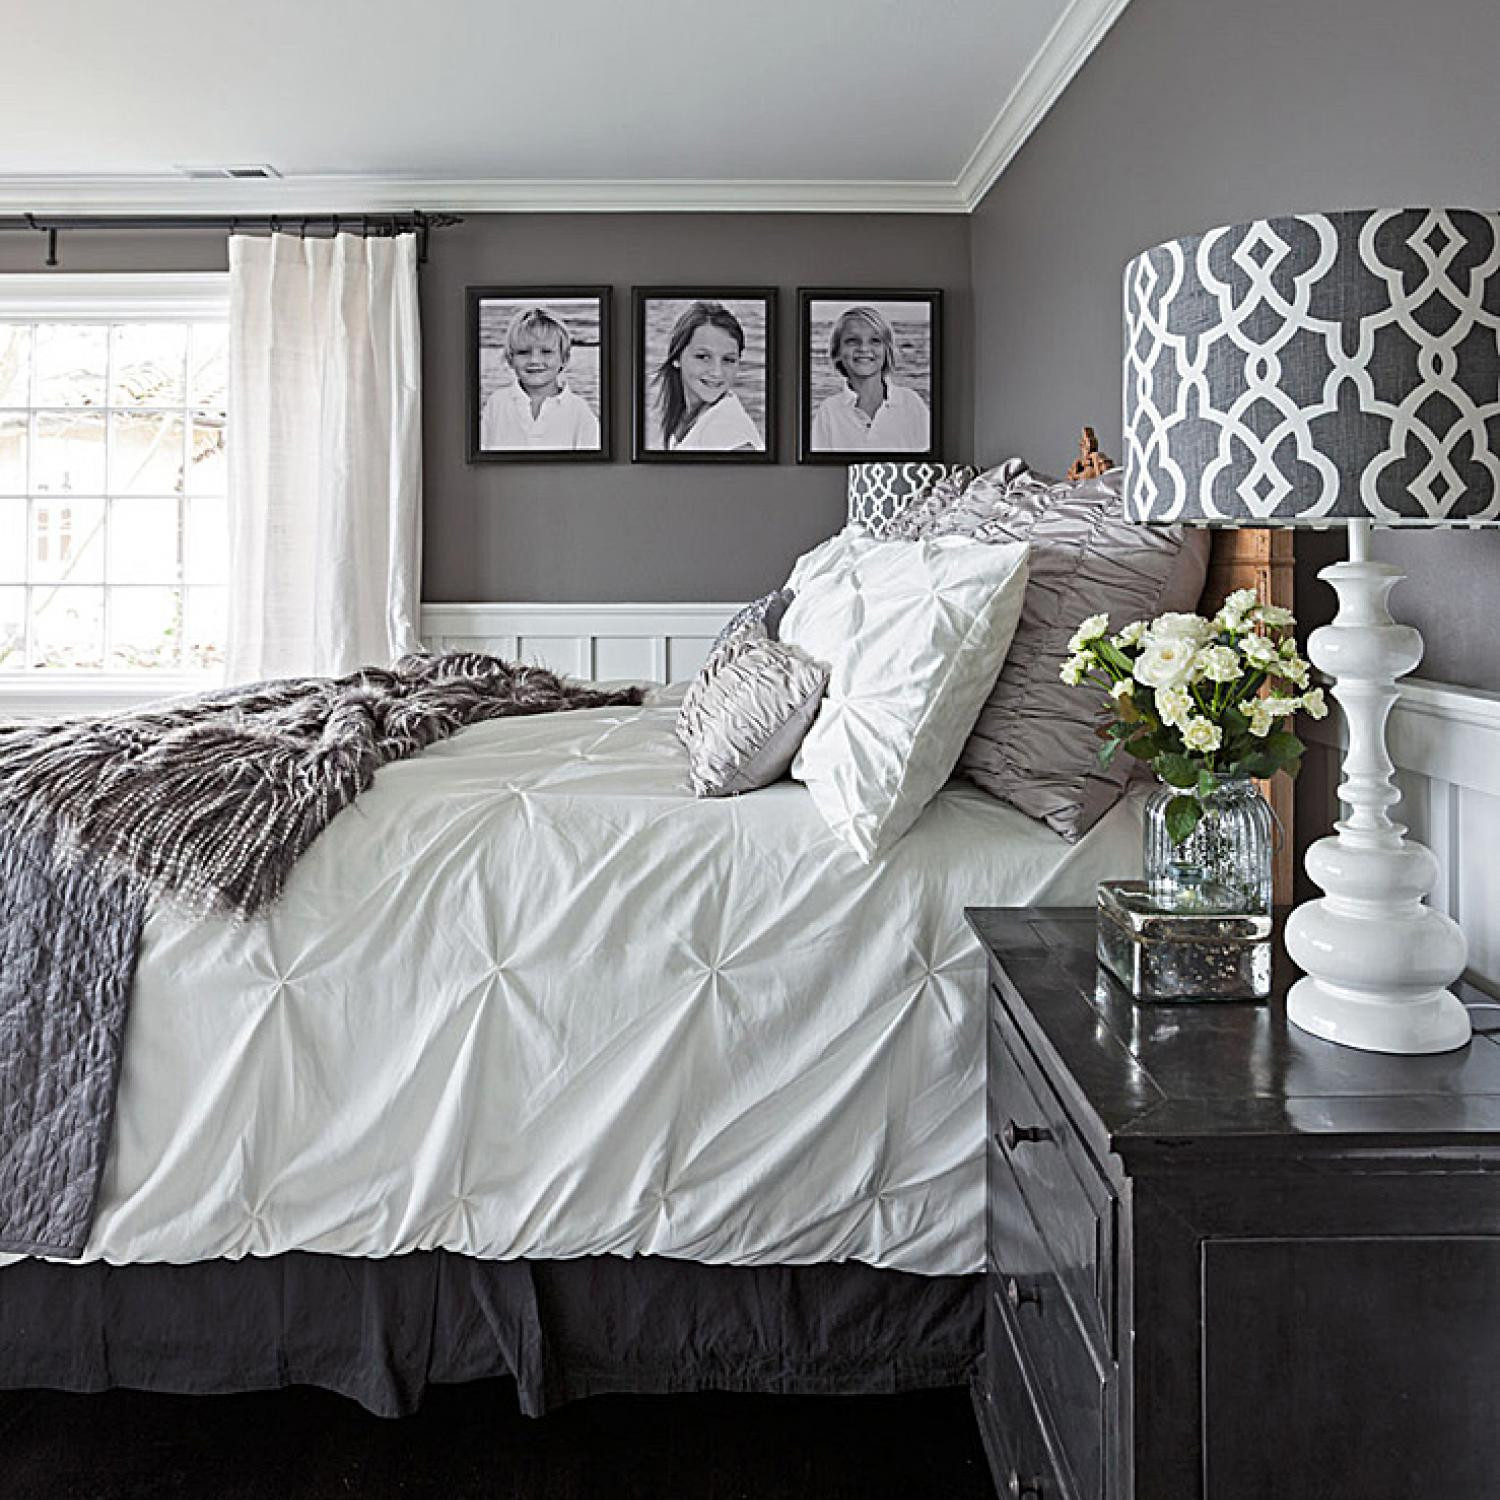 Grey Bedroom Walls
 Gorgeous Gray and White Bedrooms